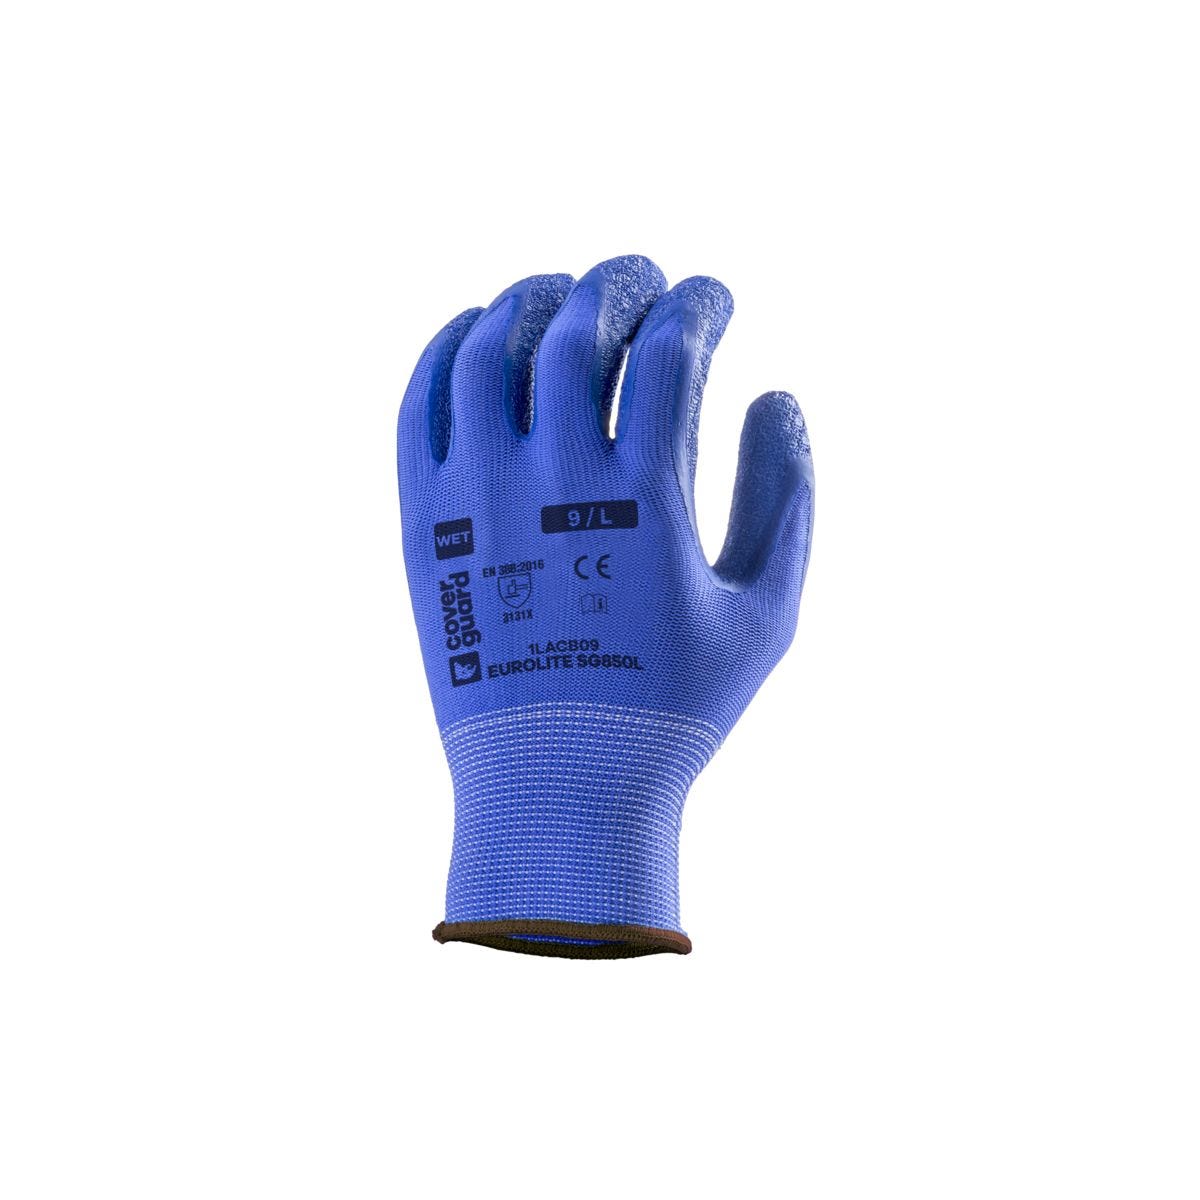 Gants SIMPLY PRO SG850L paume latex - Coverguard - Taille M-8 0